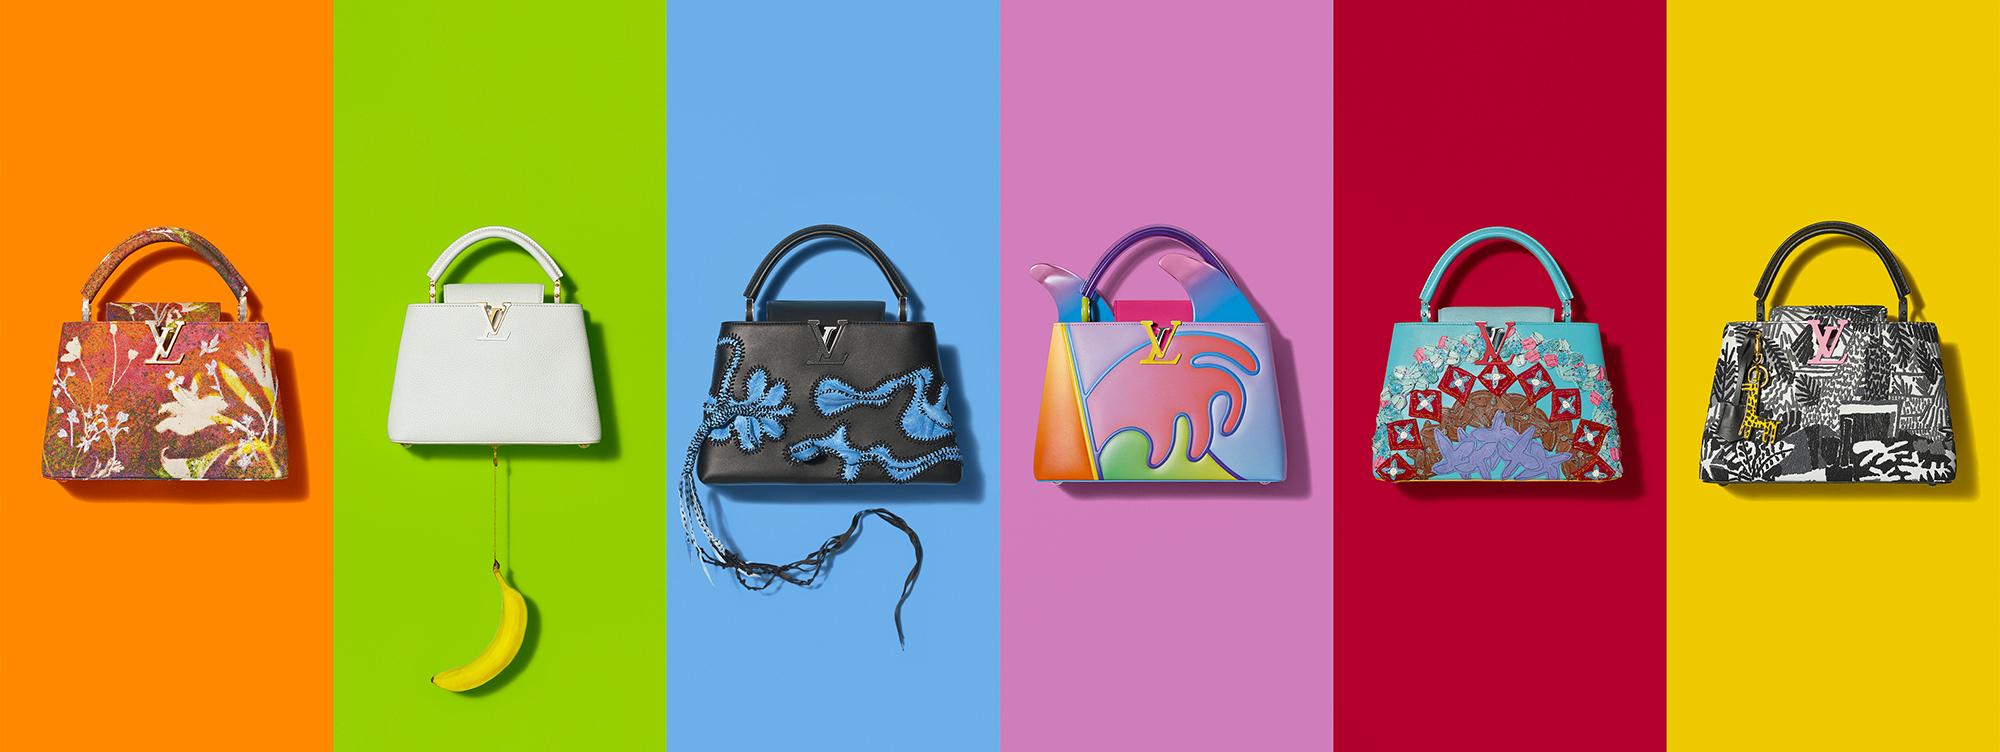 Products By Louis Vuitton: Artycapucines Pm Henry Taylor Bag